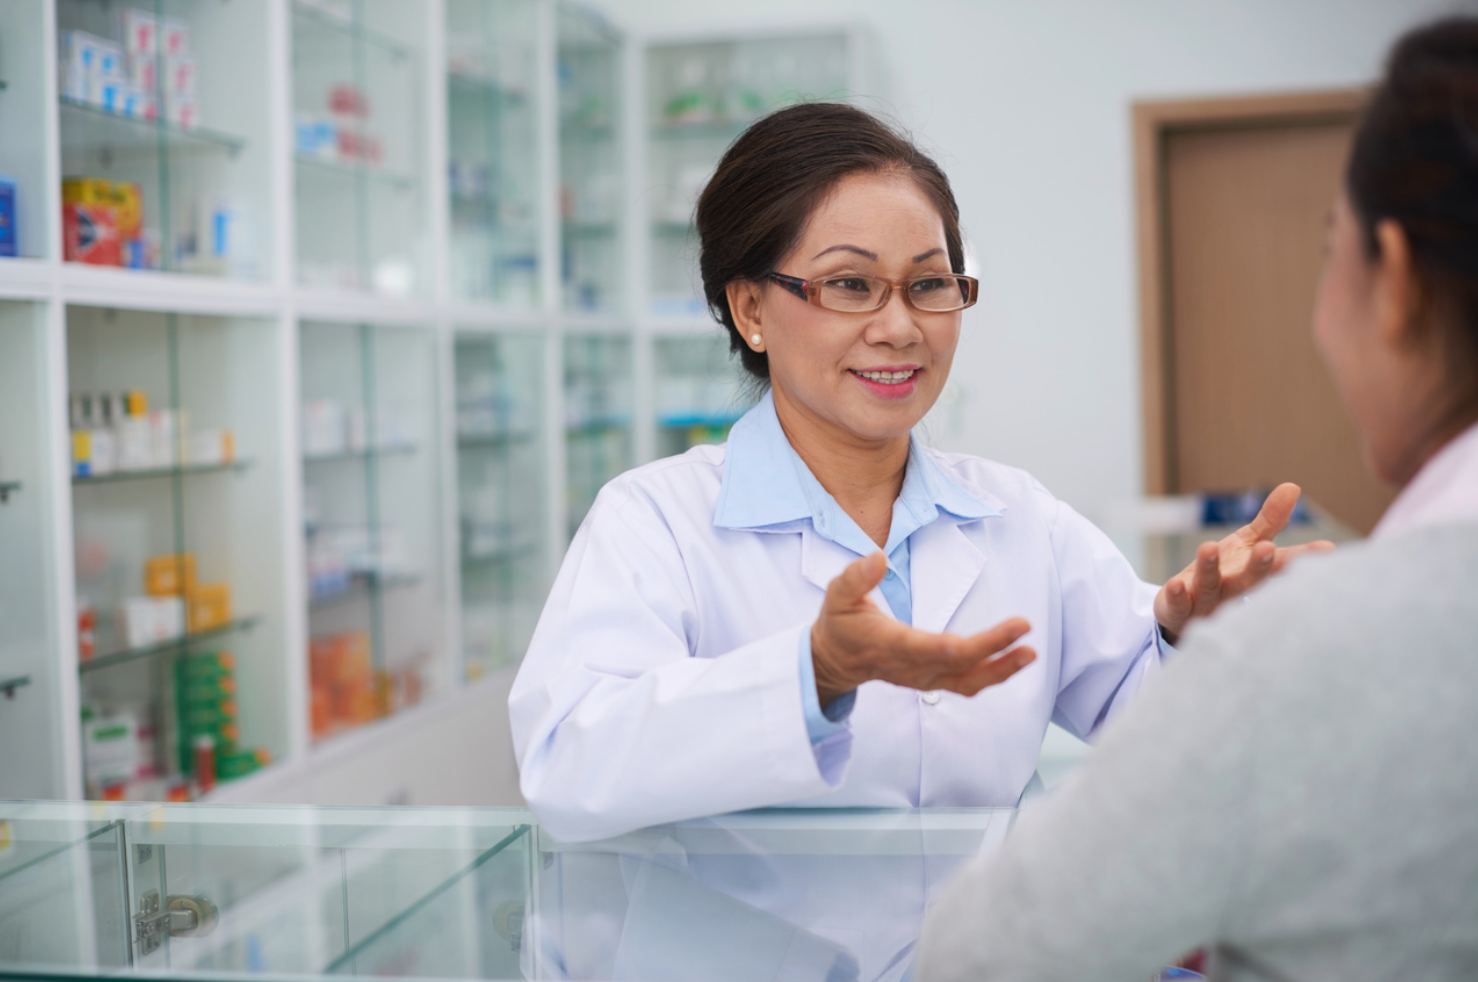 How Pharmacists Play an Important Role in Population Health and Community Wellness